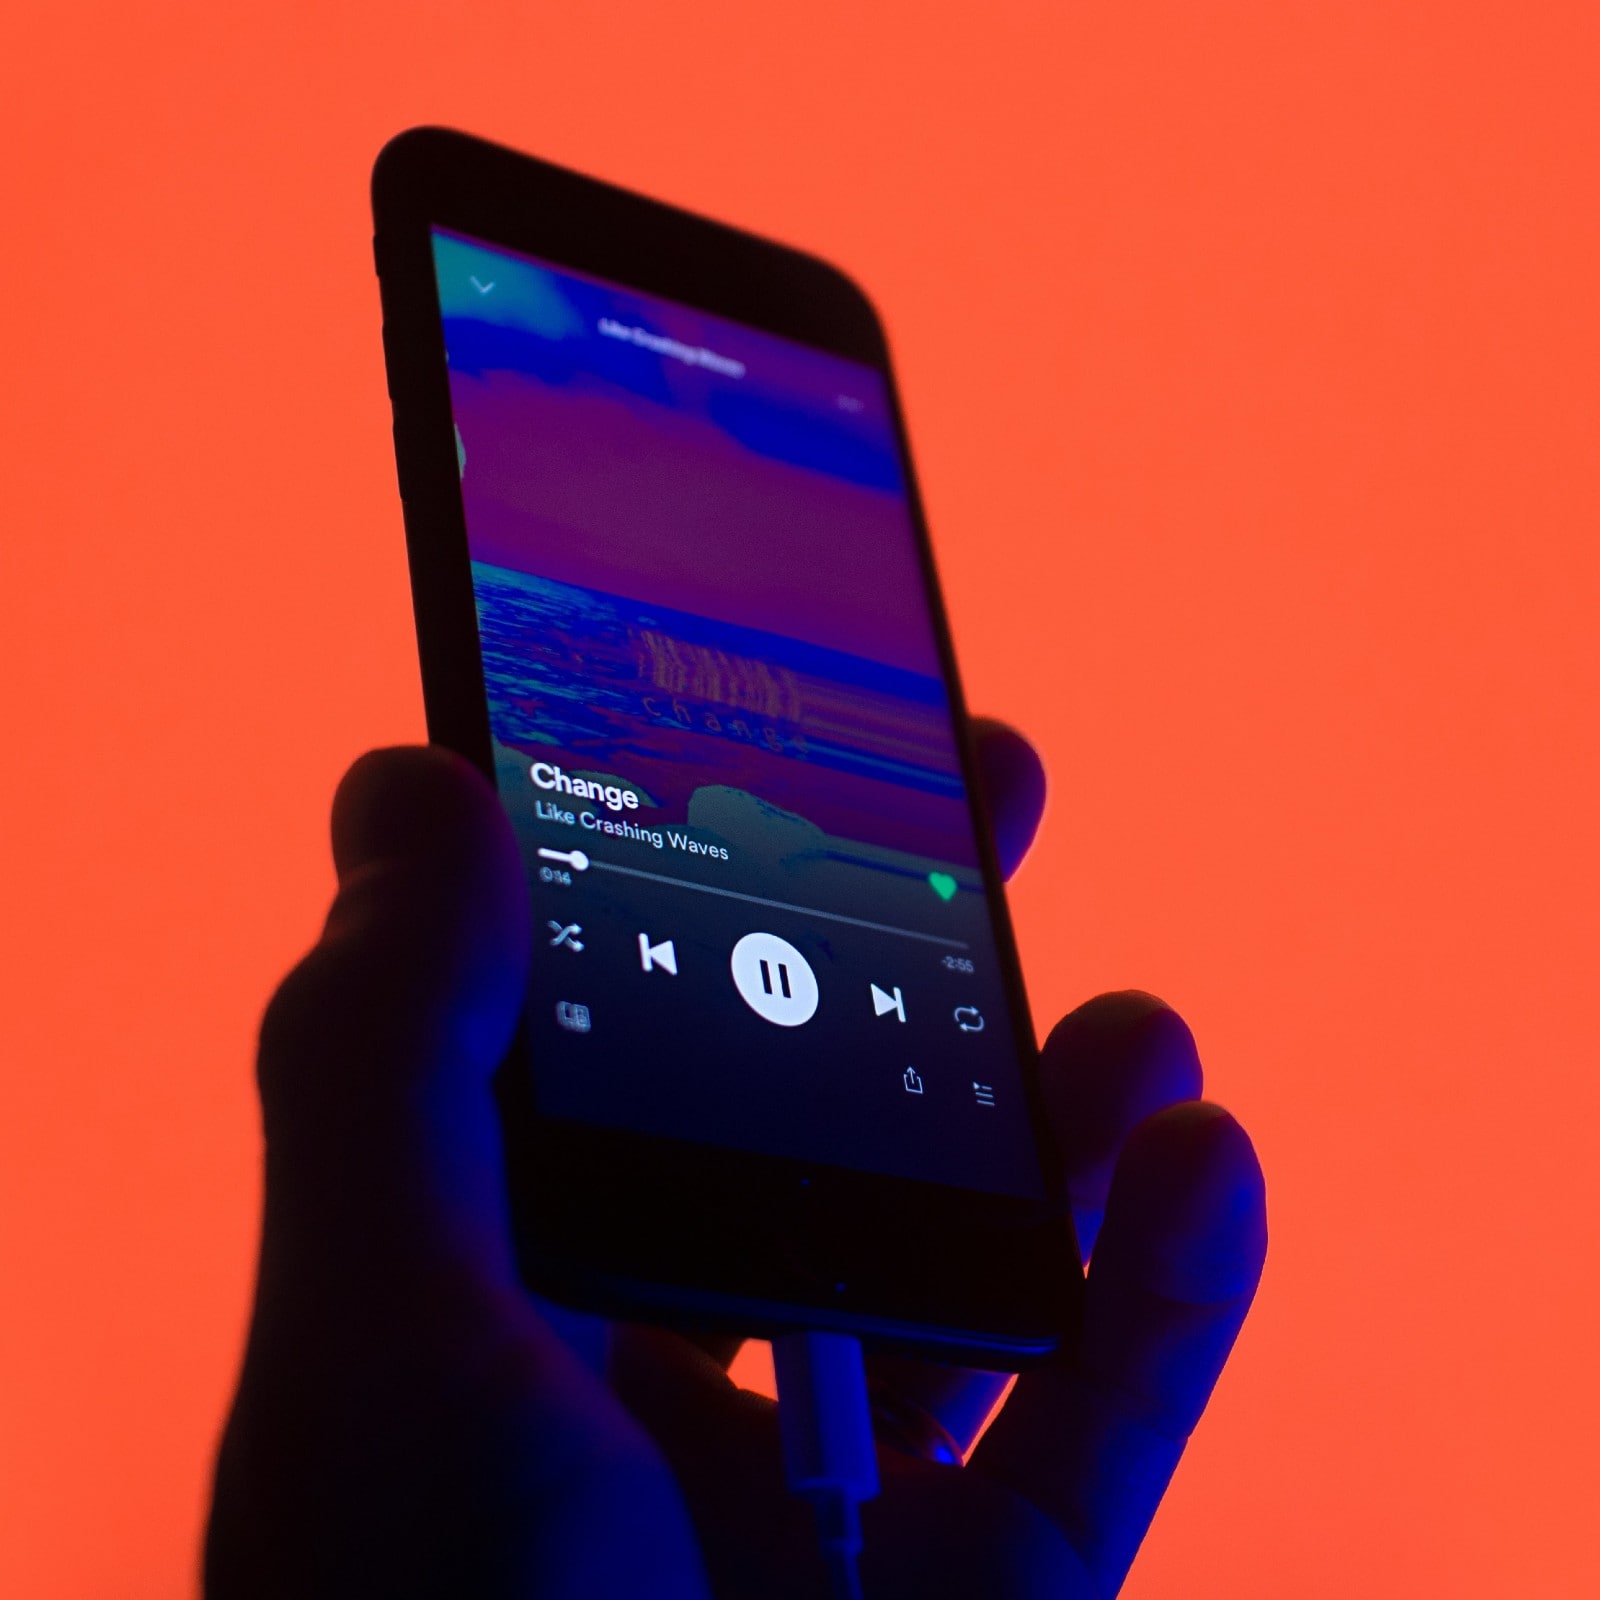 Spotify Brings Live Audio And Podcast To The Main App For Users - News18